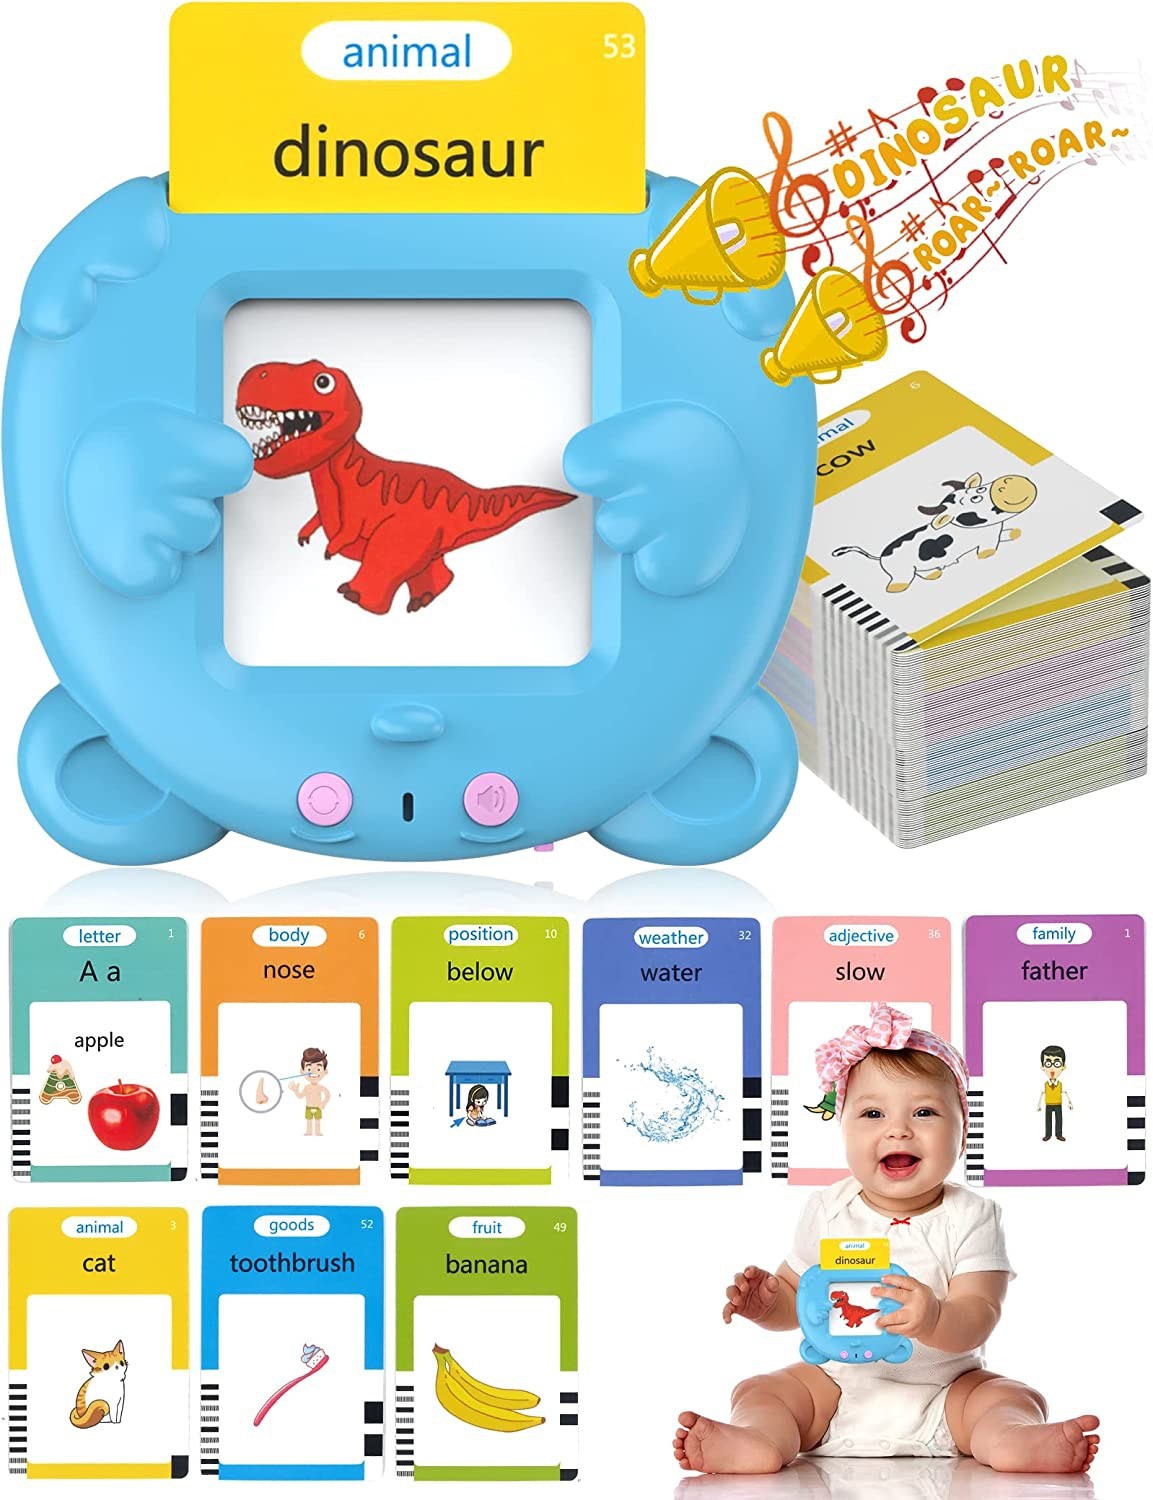 Cross-Border English Flash Cards Foreign Trade Children's Puzzle Flash Memory Card Card Inserting Machine Amazon Early Education Digital Camera